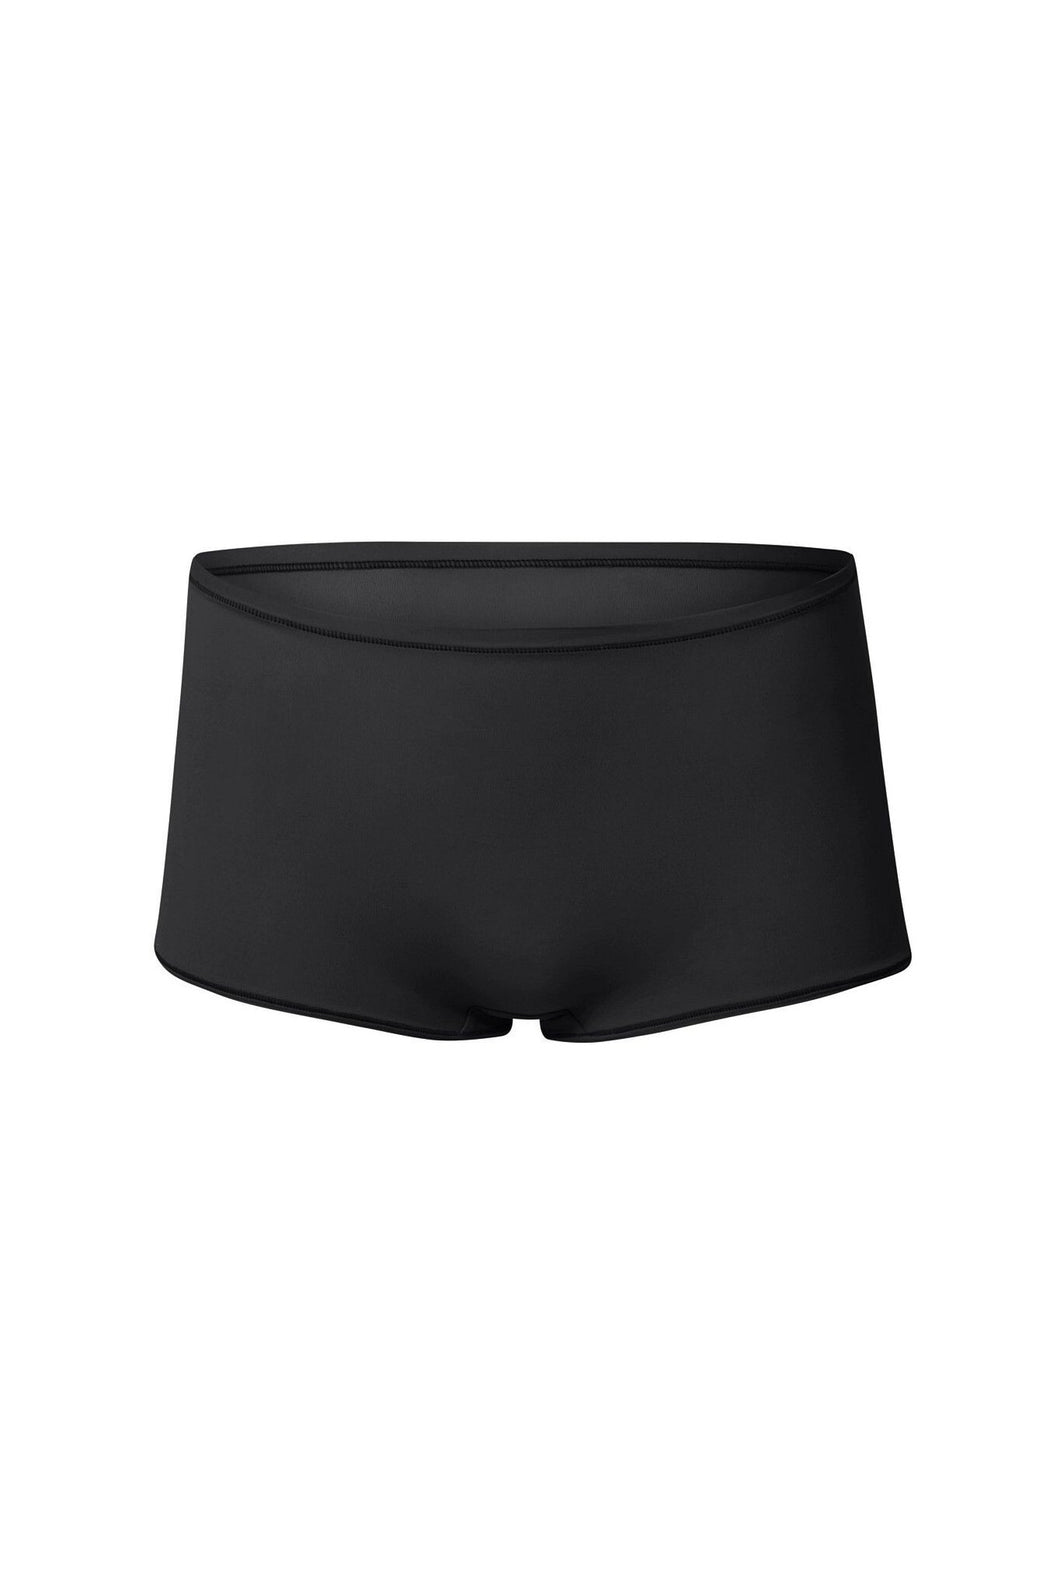 nueskin Risa in color Jet Black and shape shortie